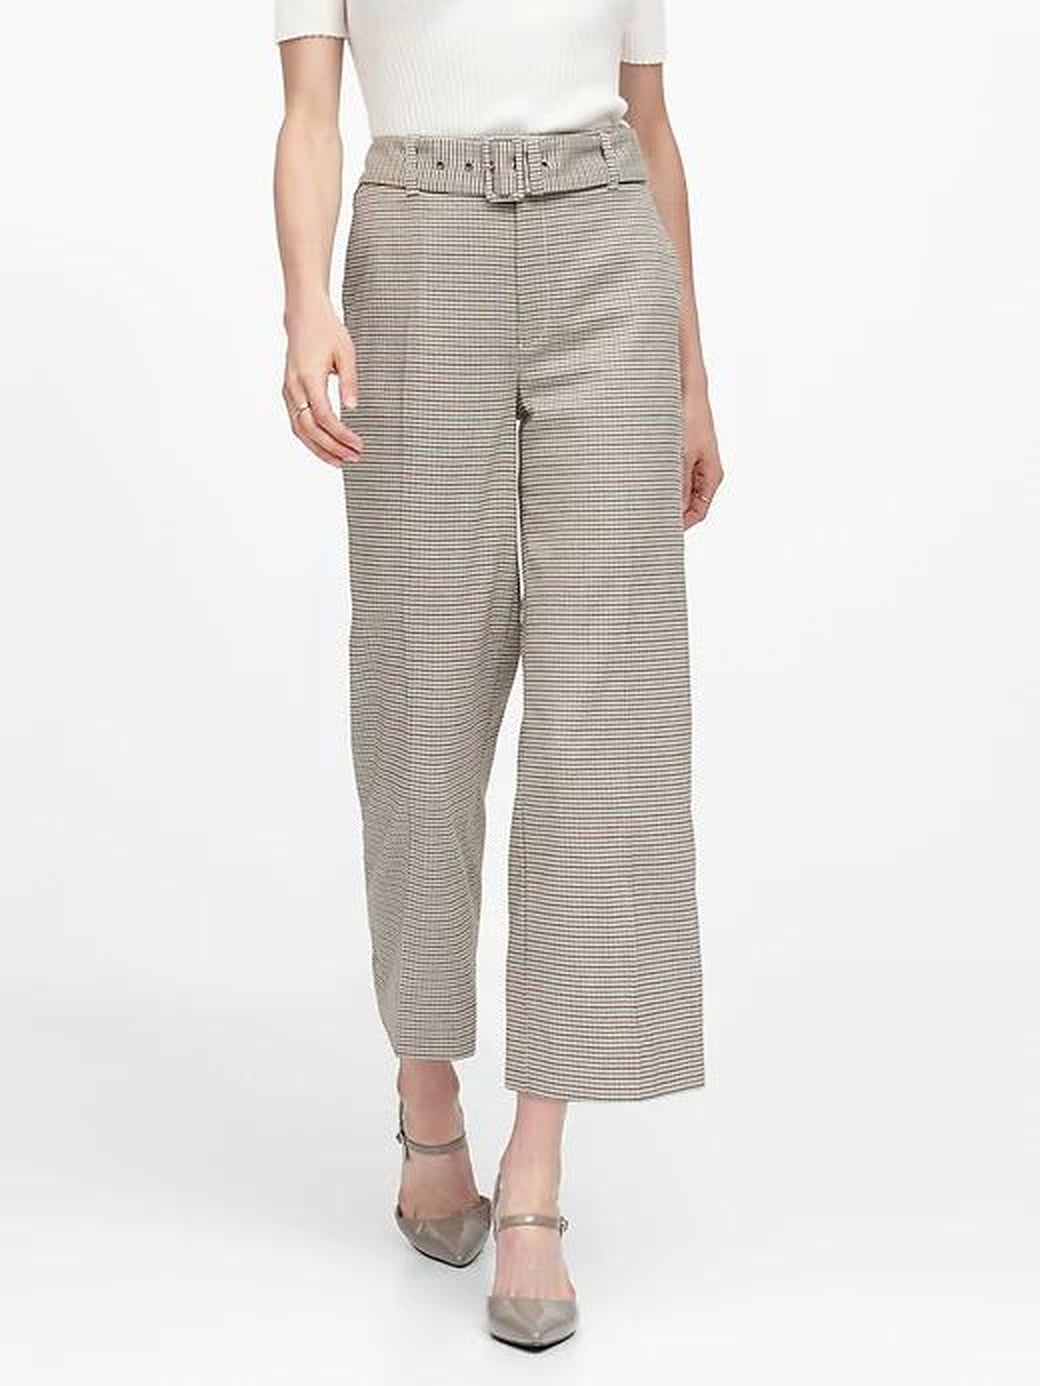 The Best New Things to Shop at Banana Republic | POPSUGAR Fashion